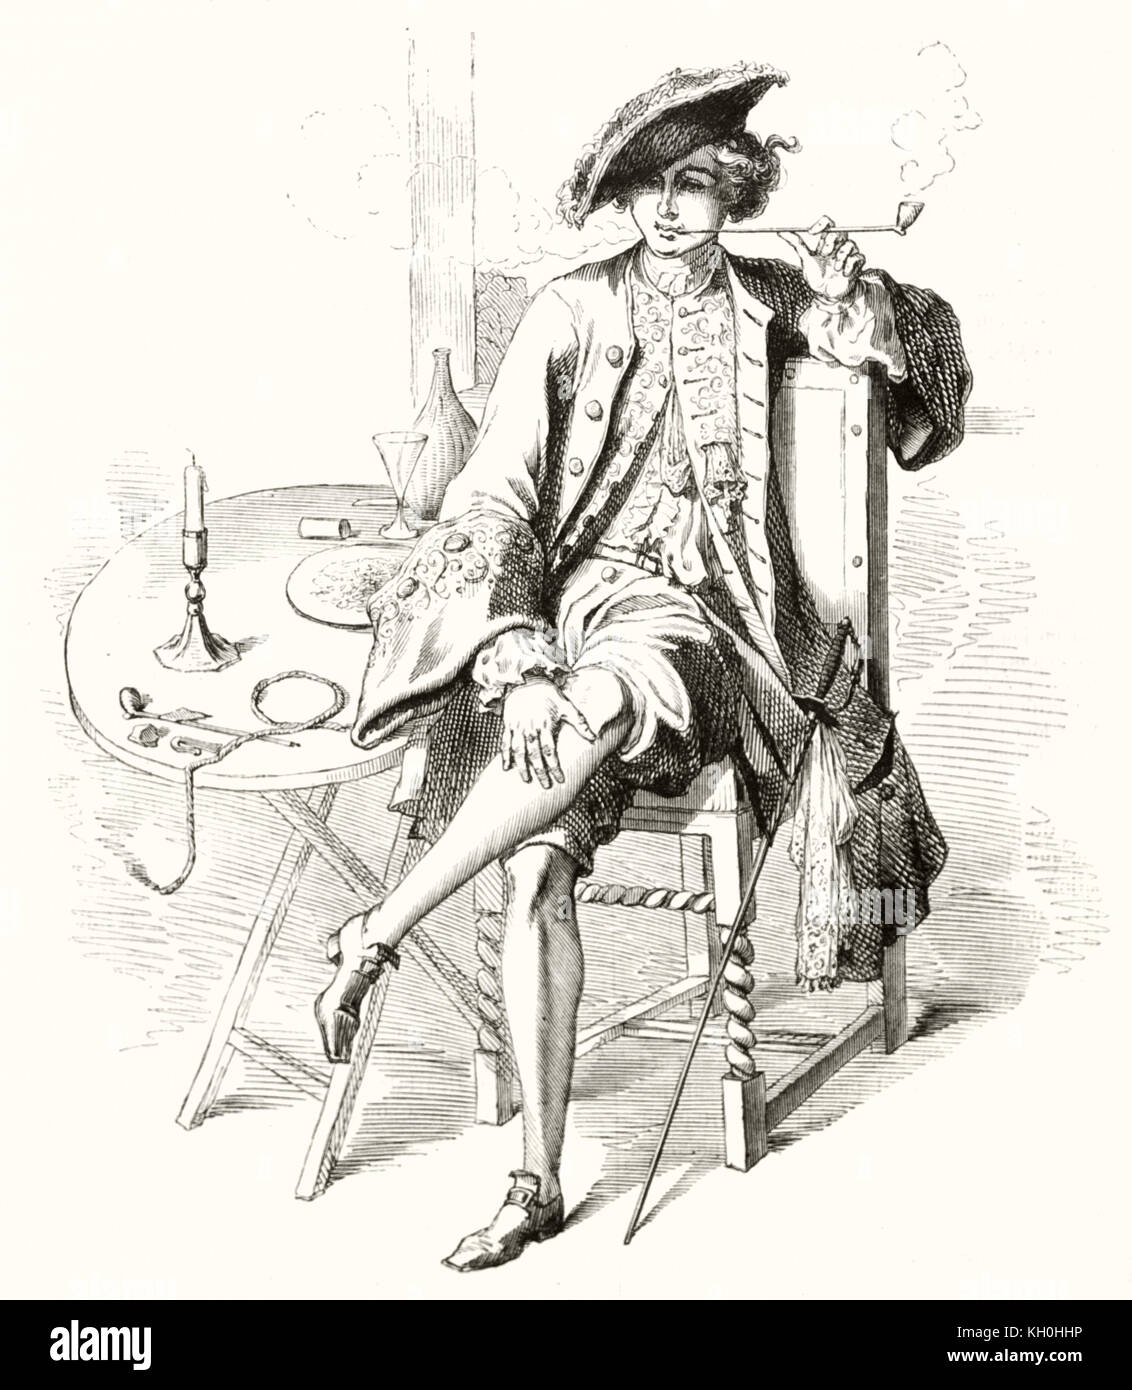 Reproduction of a 17th century print depicting a smoking man. By unidentified author, publ. on Magasin Pittoresque, Paris, 1847 Stock Photo